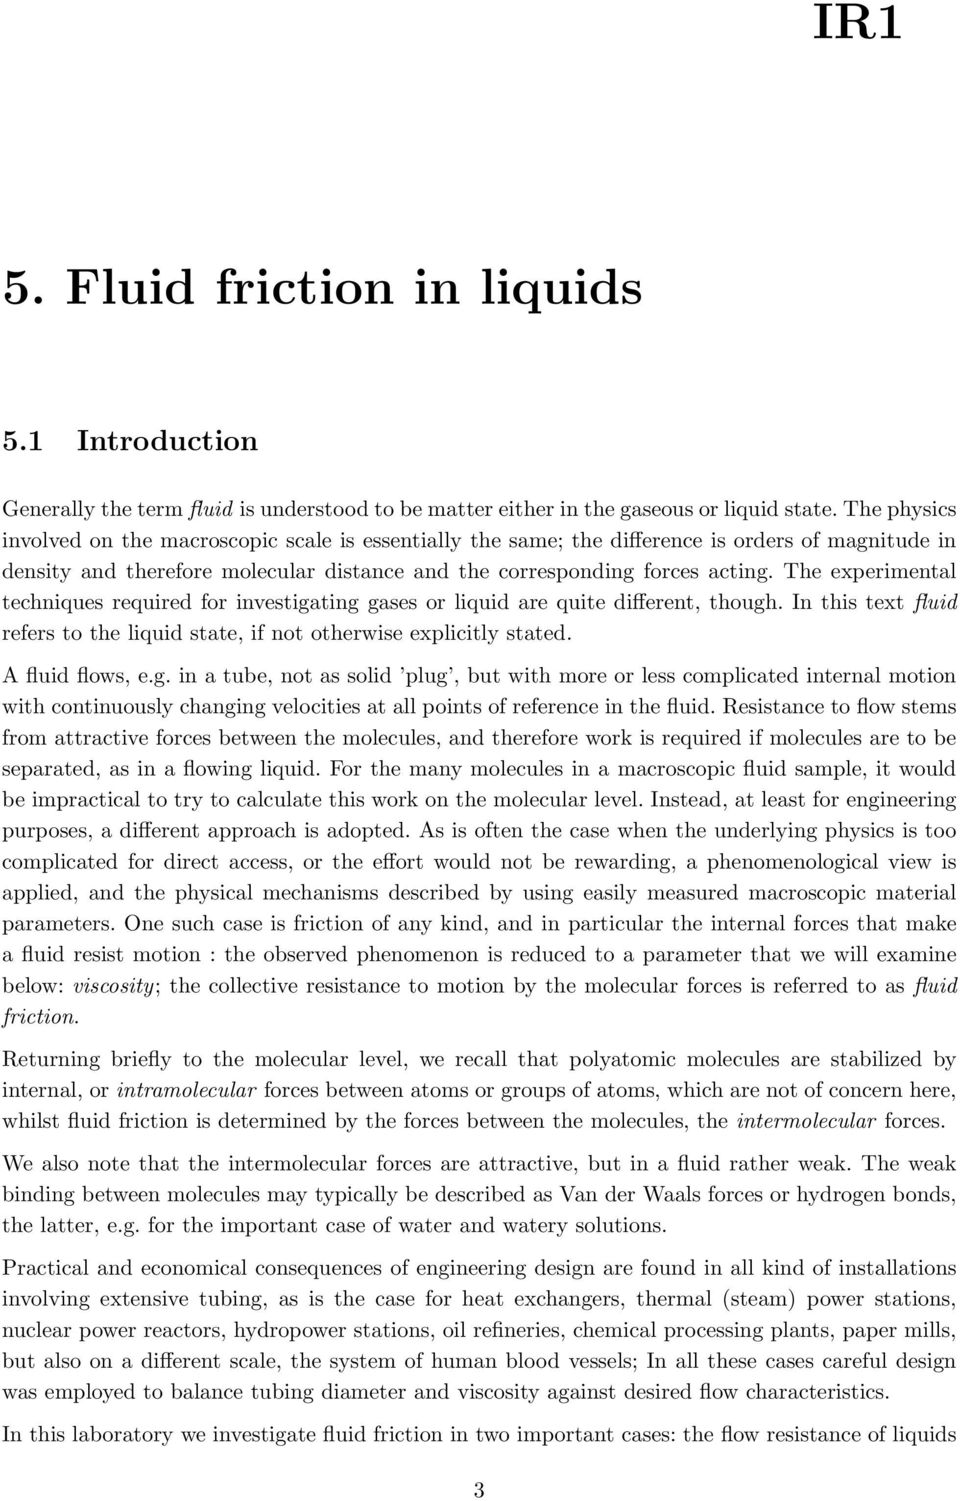 The experimental techniques required for investigating gases or liquid are quite different, though. In this text fluid refers to the liquid state, if not otherwise explicitly stated. A fluid flows, e.